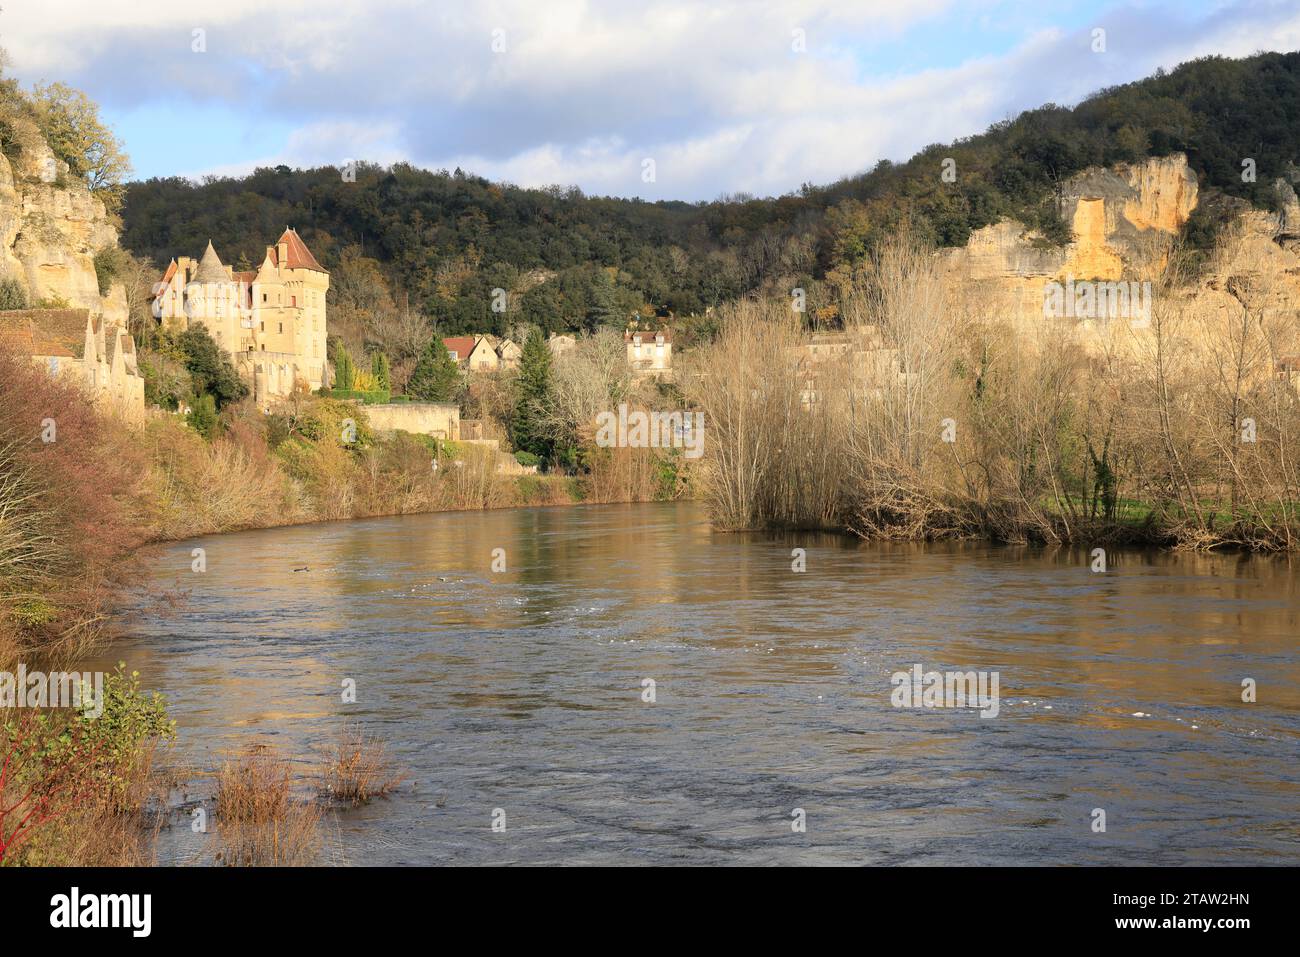 La Roque-Gageac, France. December 2, 2023. After the summer drought, the November rains have just raised the level of French rivers which often overflow their banks. Here the Dordogne river, at La Roque-Gageac in Périgord Noir, is high while during the summer its level was very low. The village of La Roque-Gageac is one of the most beautiful villages in France. La Roque-Gageac, Périgord, Dordogne, France, Europe. Photo by Hugo Martin/Alamy Live News. Stock Photo